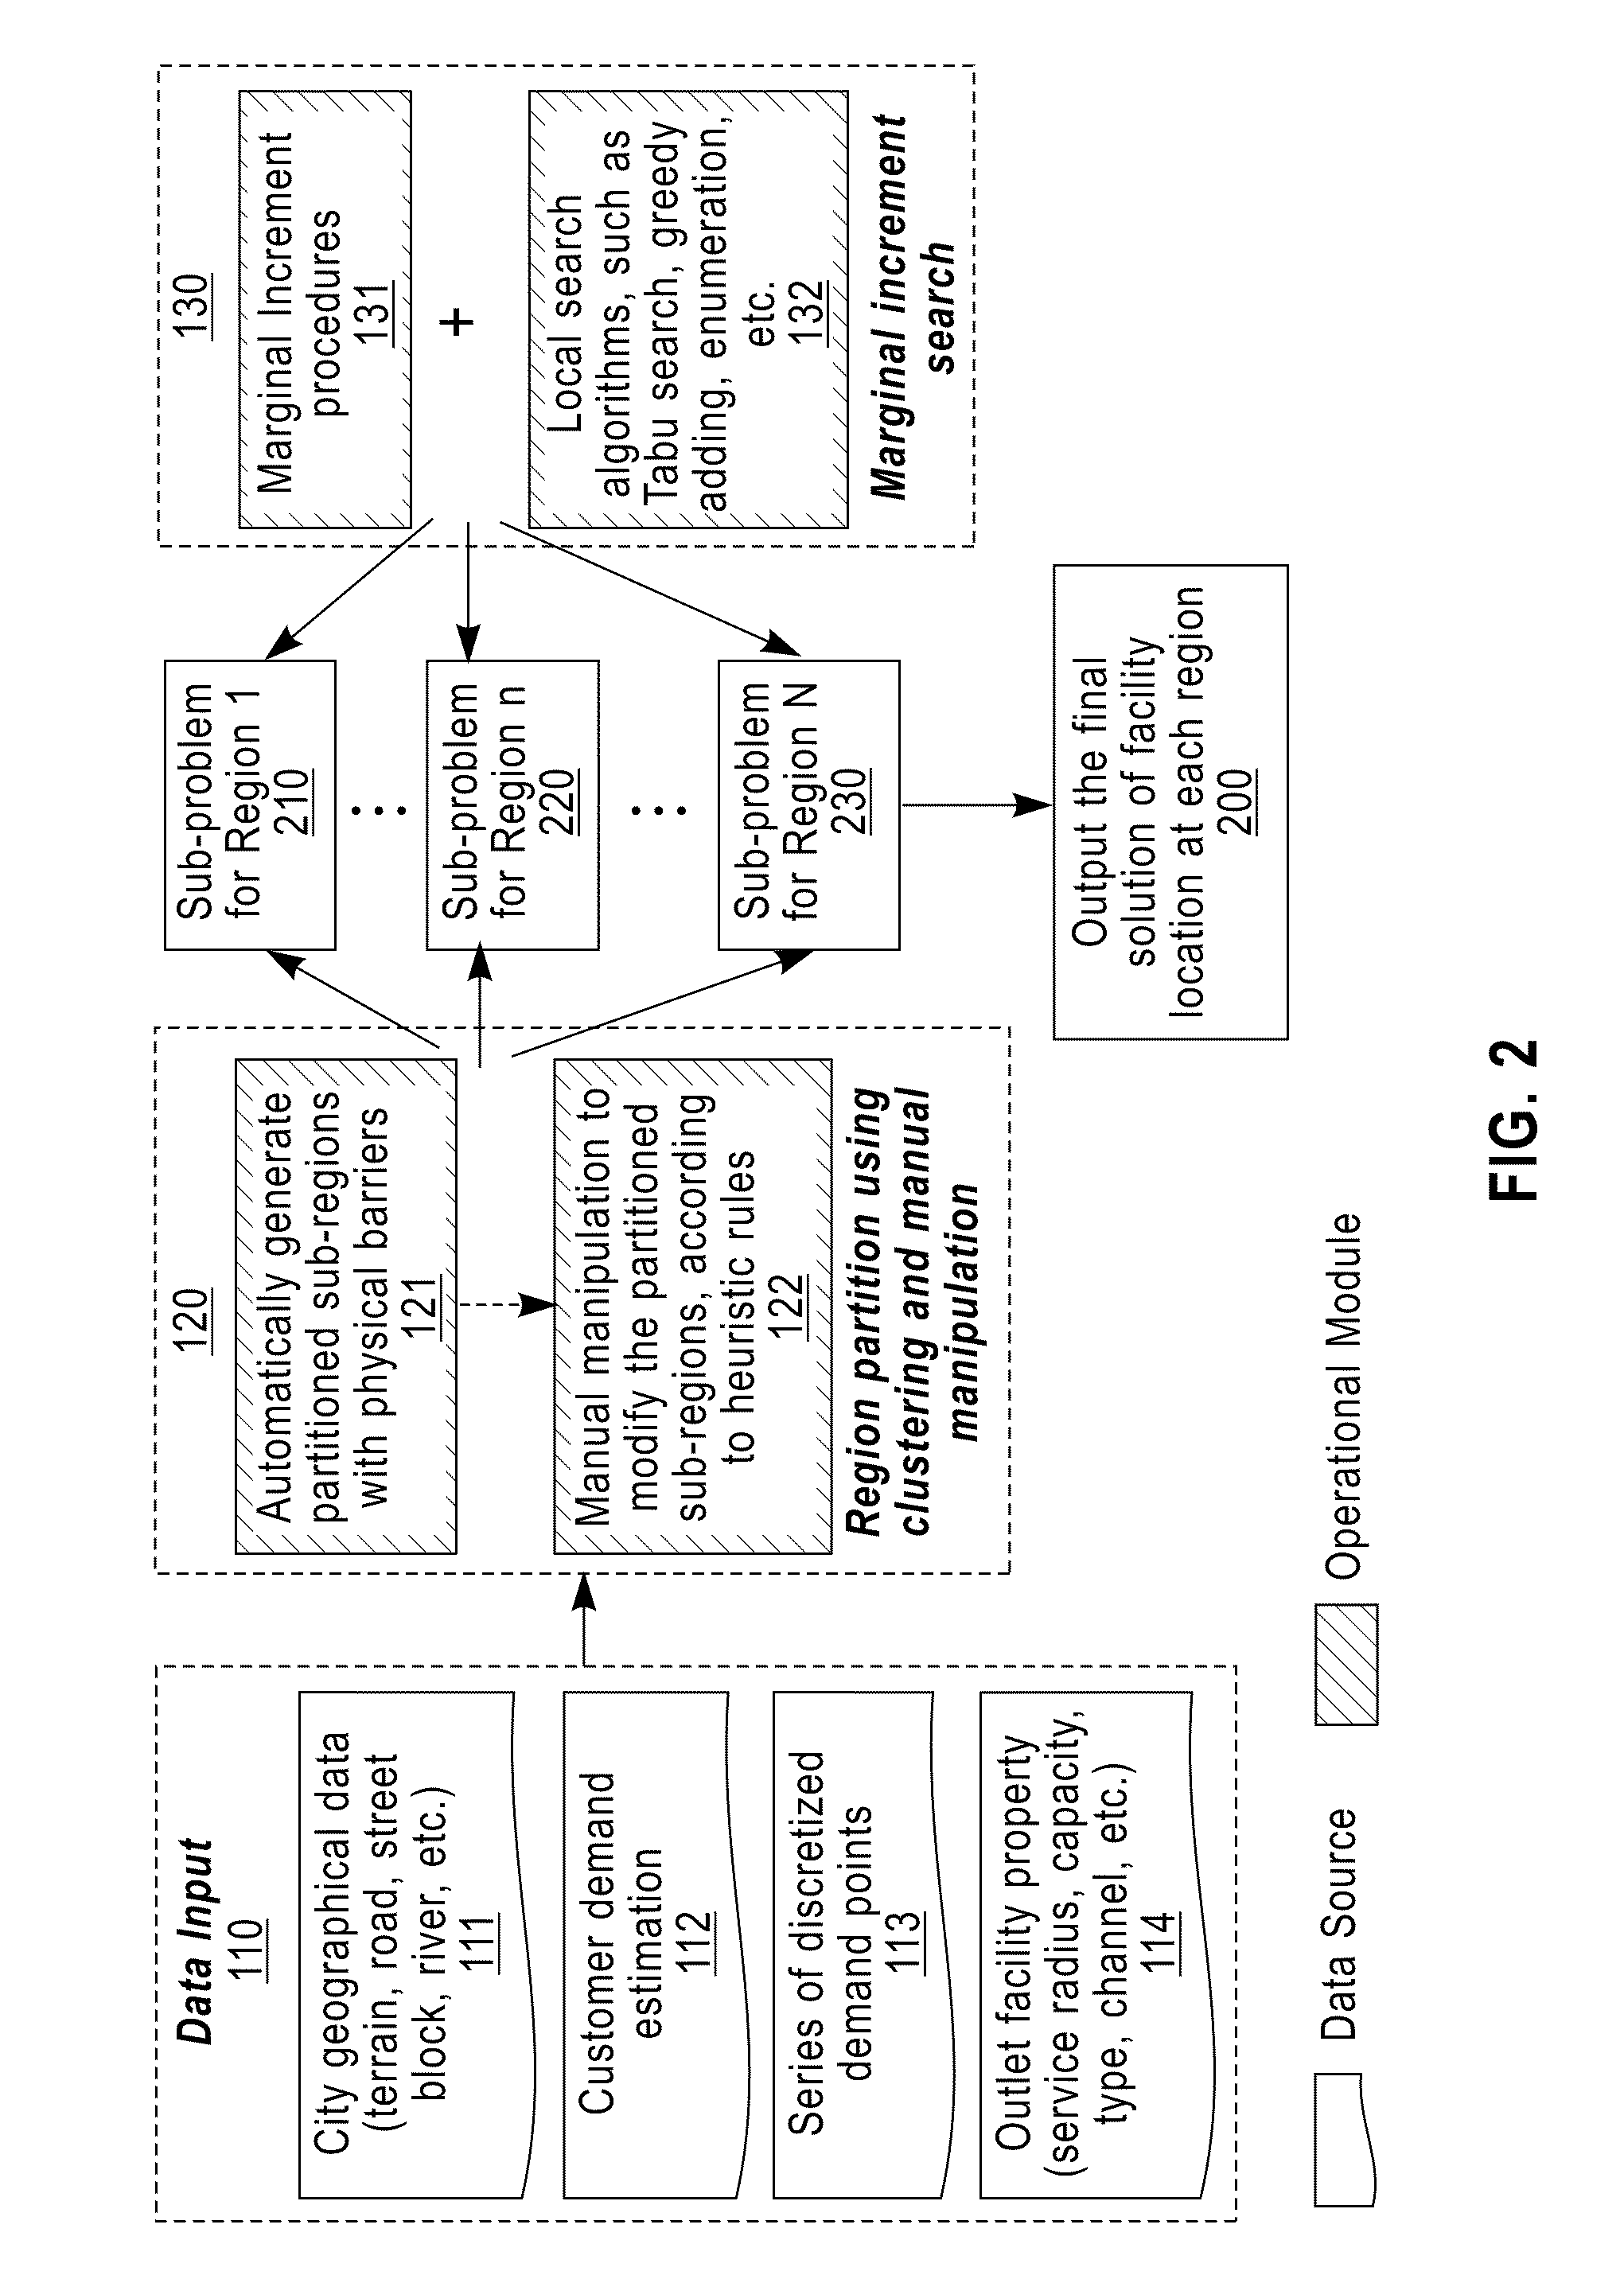 Method and apparatus for outlet location selection using the market region partition and marginal increment assignment algorithm